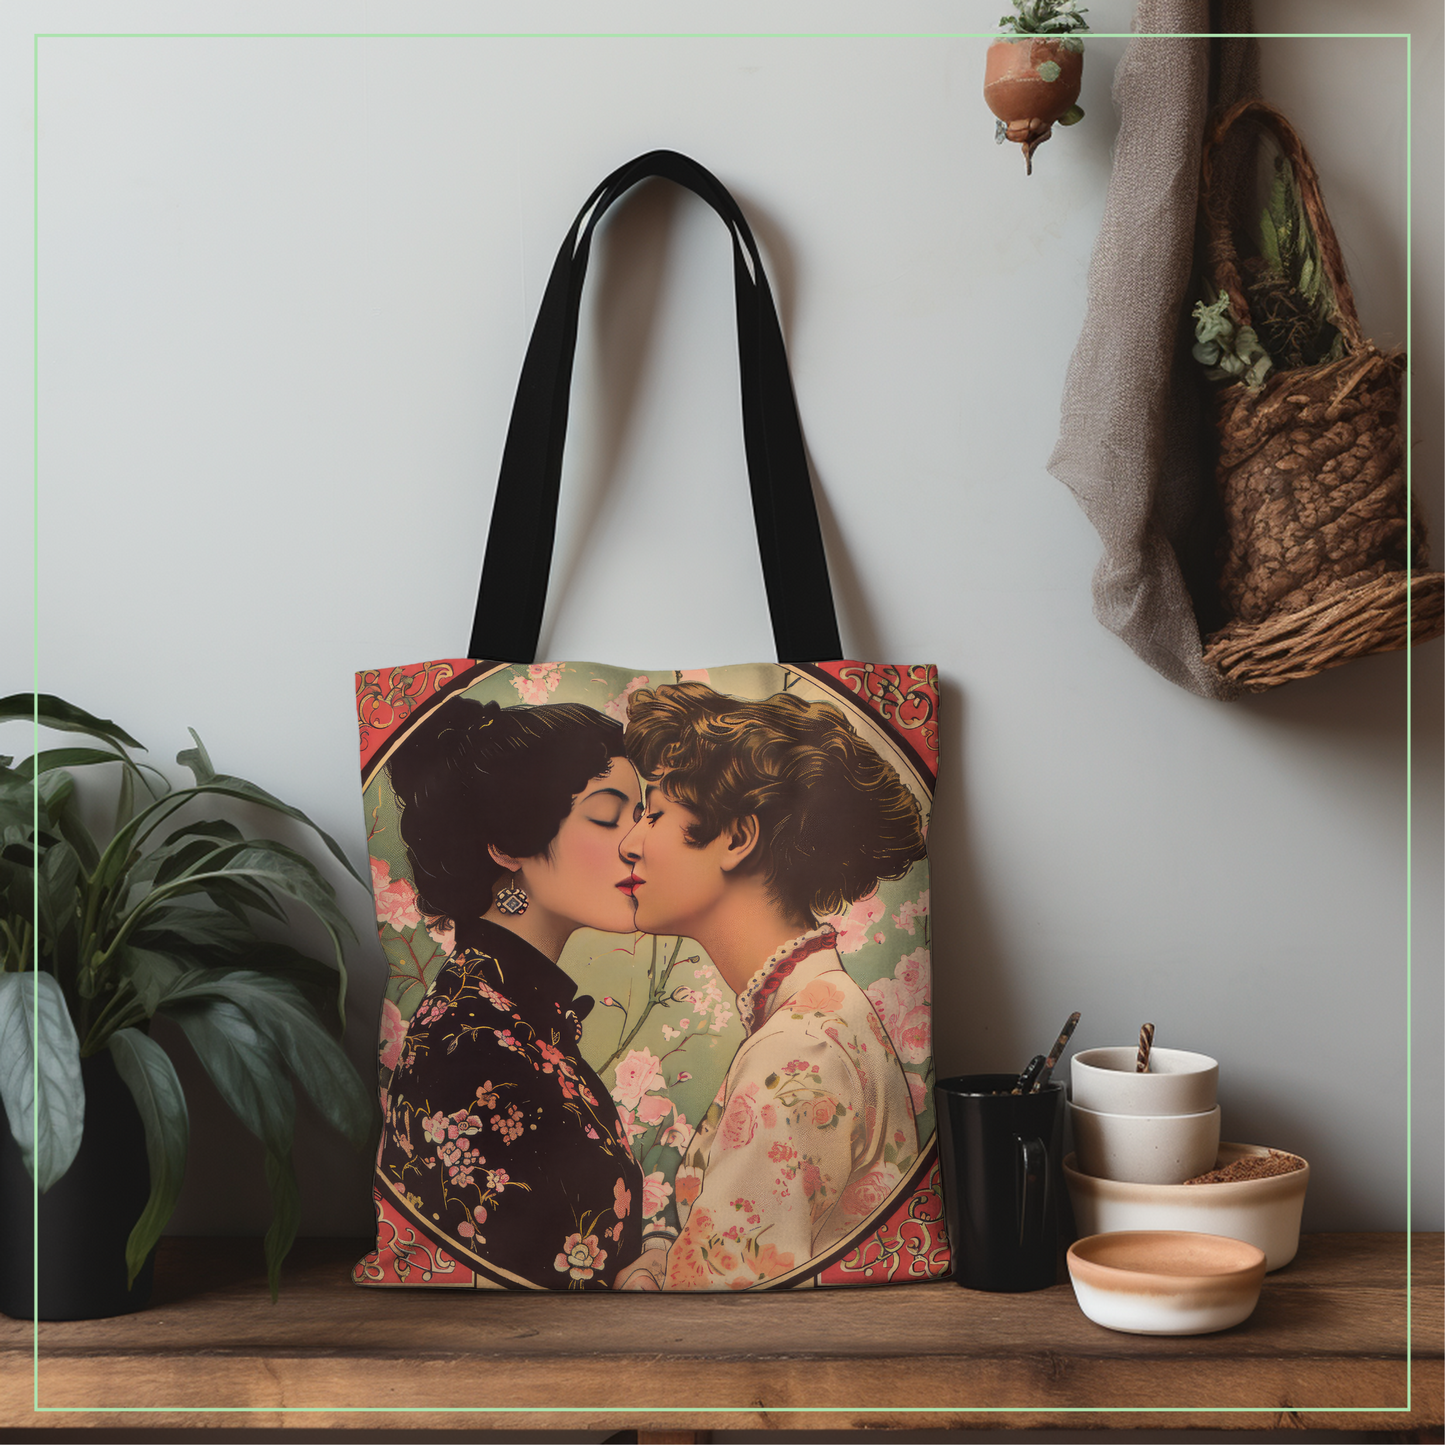 Tender Kiss - Vintage Queer Love Collection